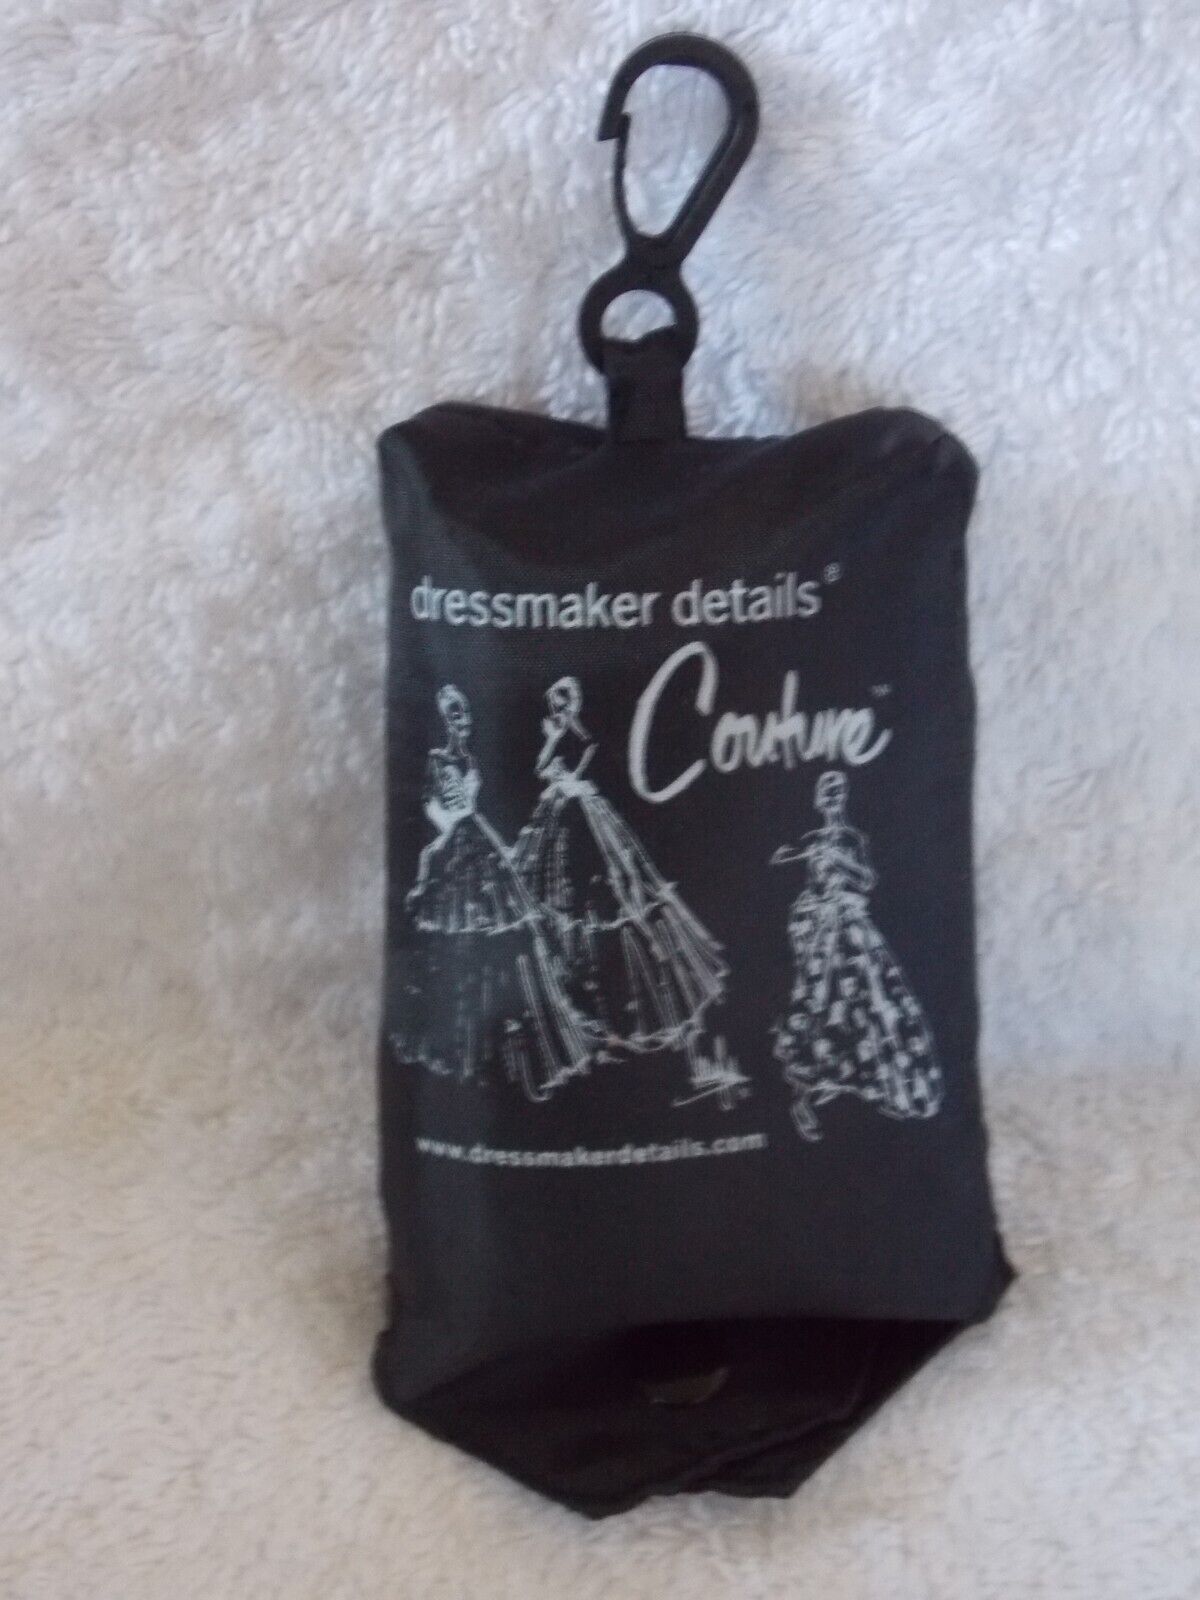 Dressmaker Details Couture Compact Carry Tote/Purse  Barbie Convention Gift